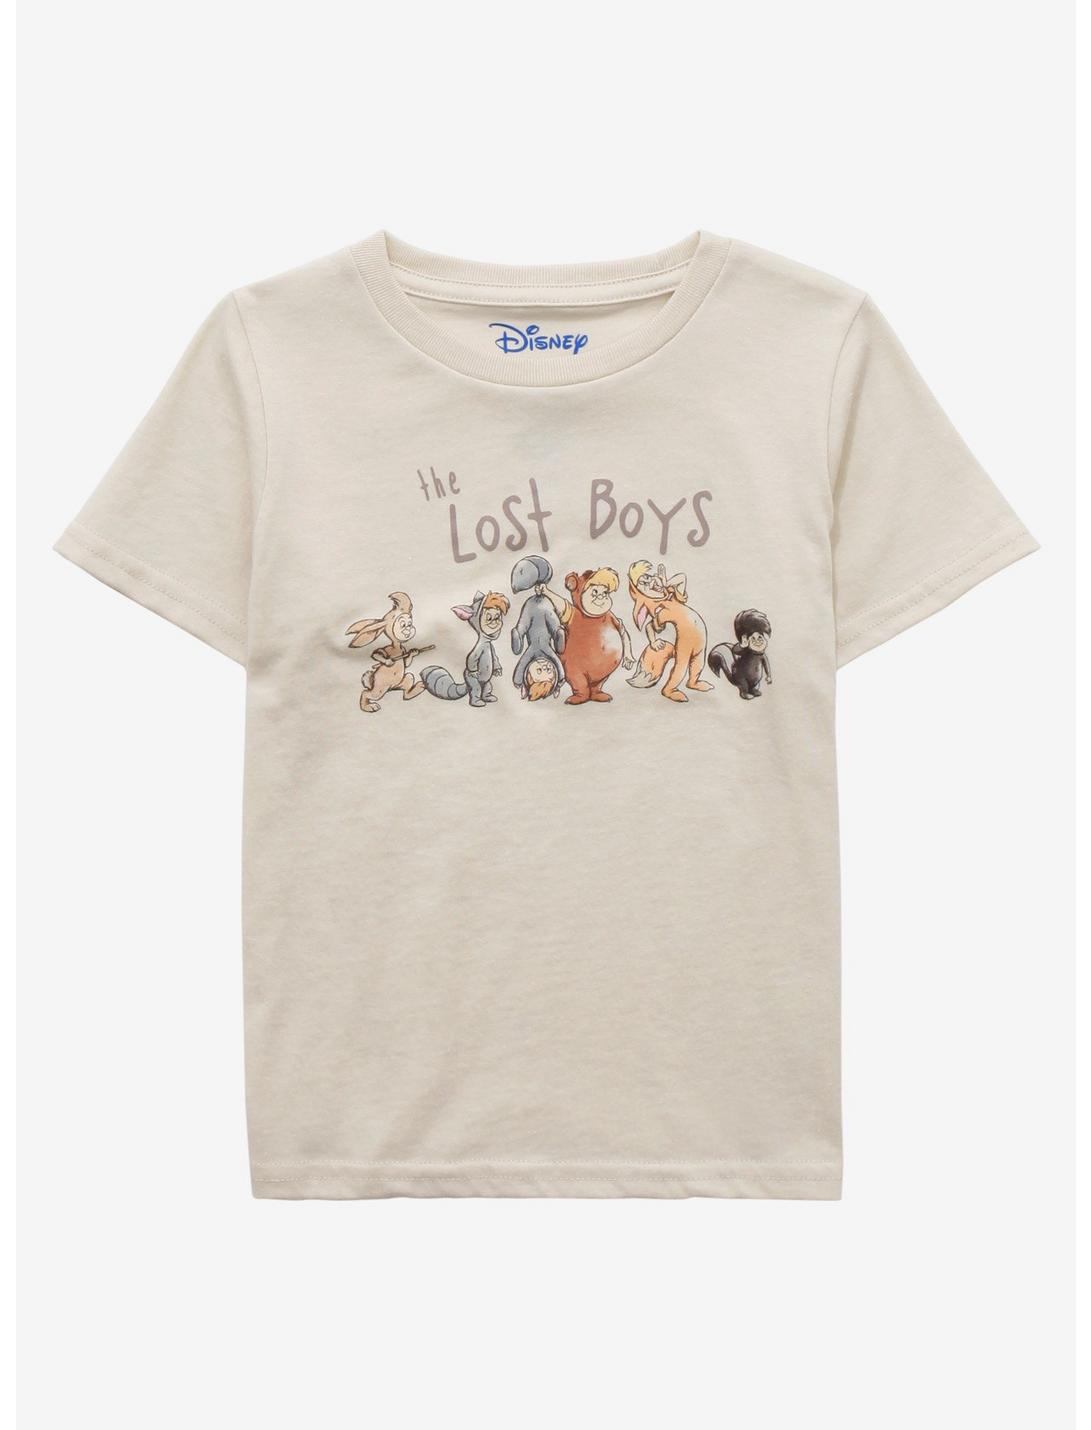 Disney Peter Pan The Lost Boys Toddler T-Shirt - BoxLunch Exclusive, BROWN, hi-res